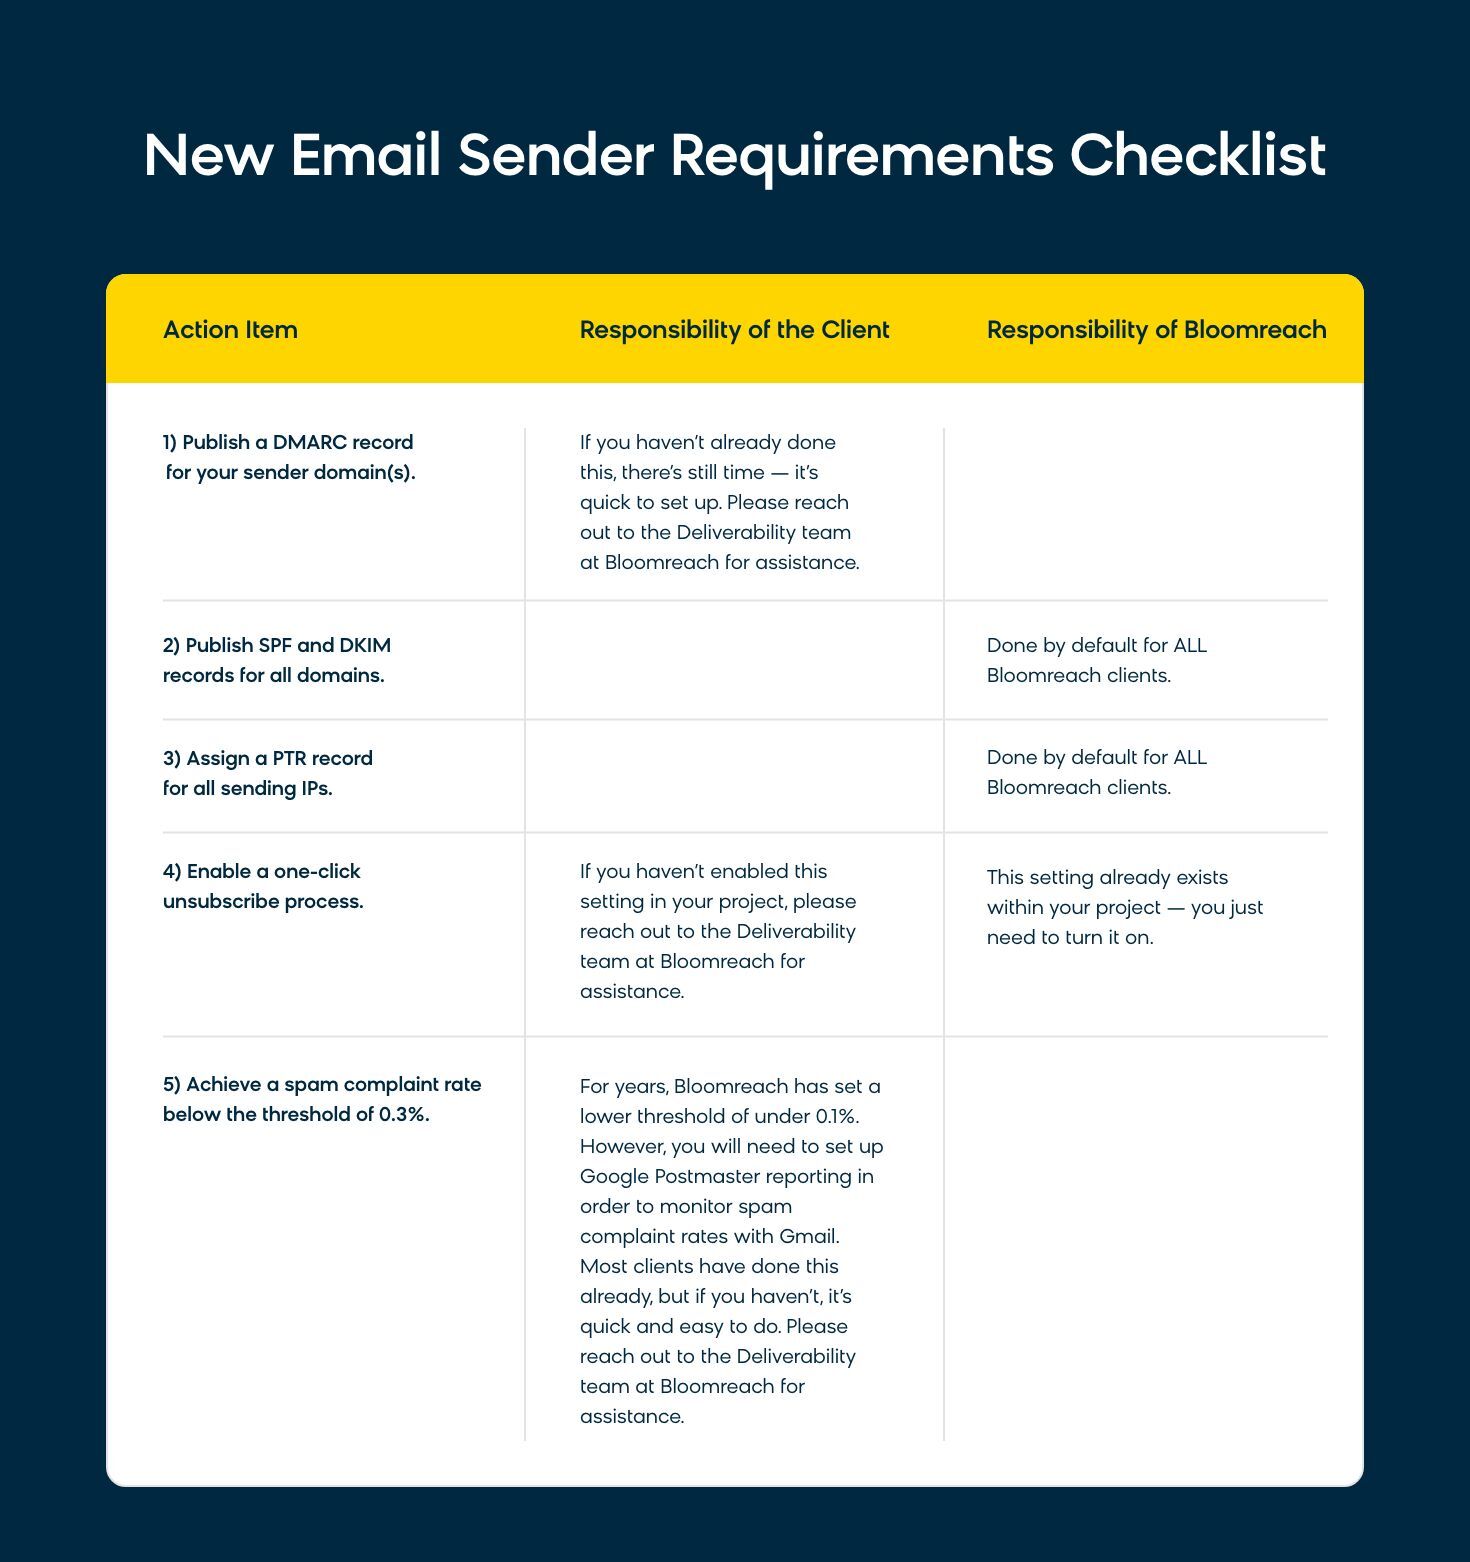 A checklist to prepare for changes to Gmail and Yahoo's email sender requirements